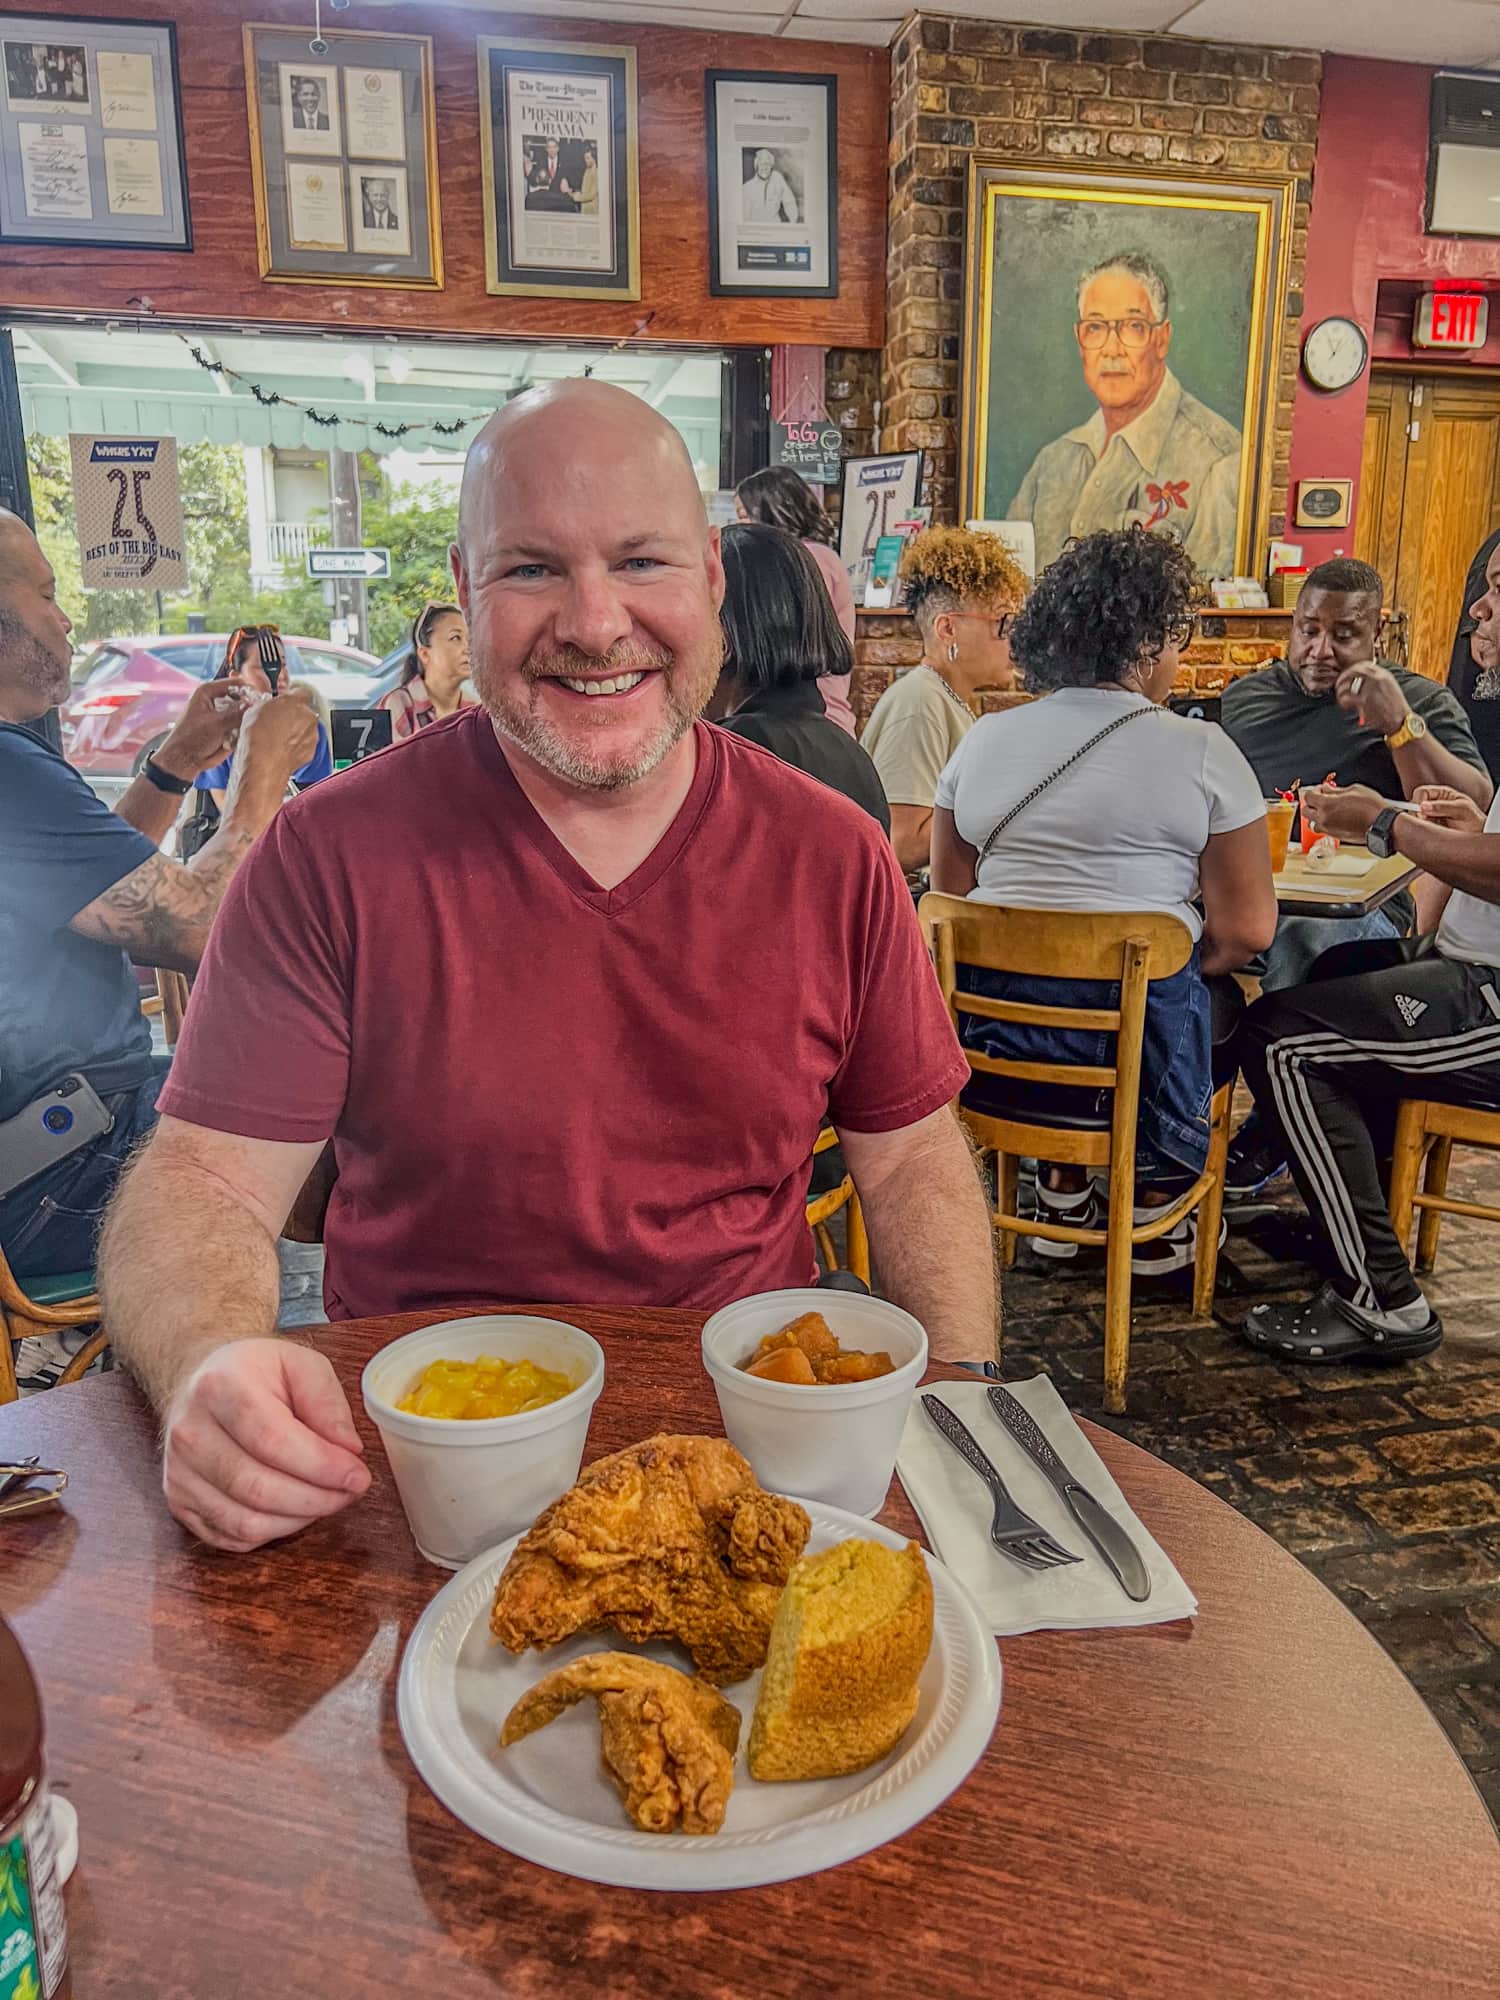 Fried chicken lunch at Li'l Dizzy's Cafe in New Orleans (photo by Kelly Lemons)